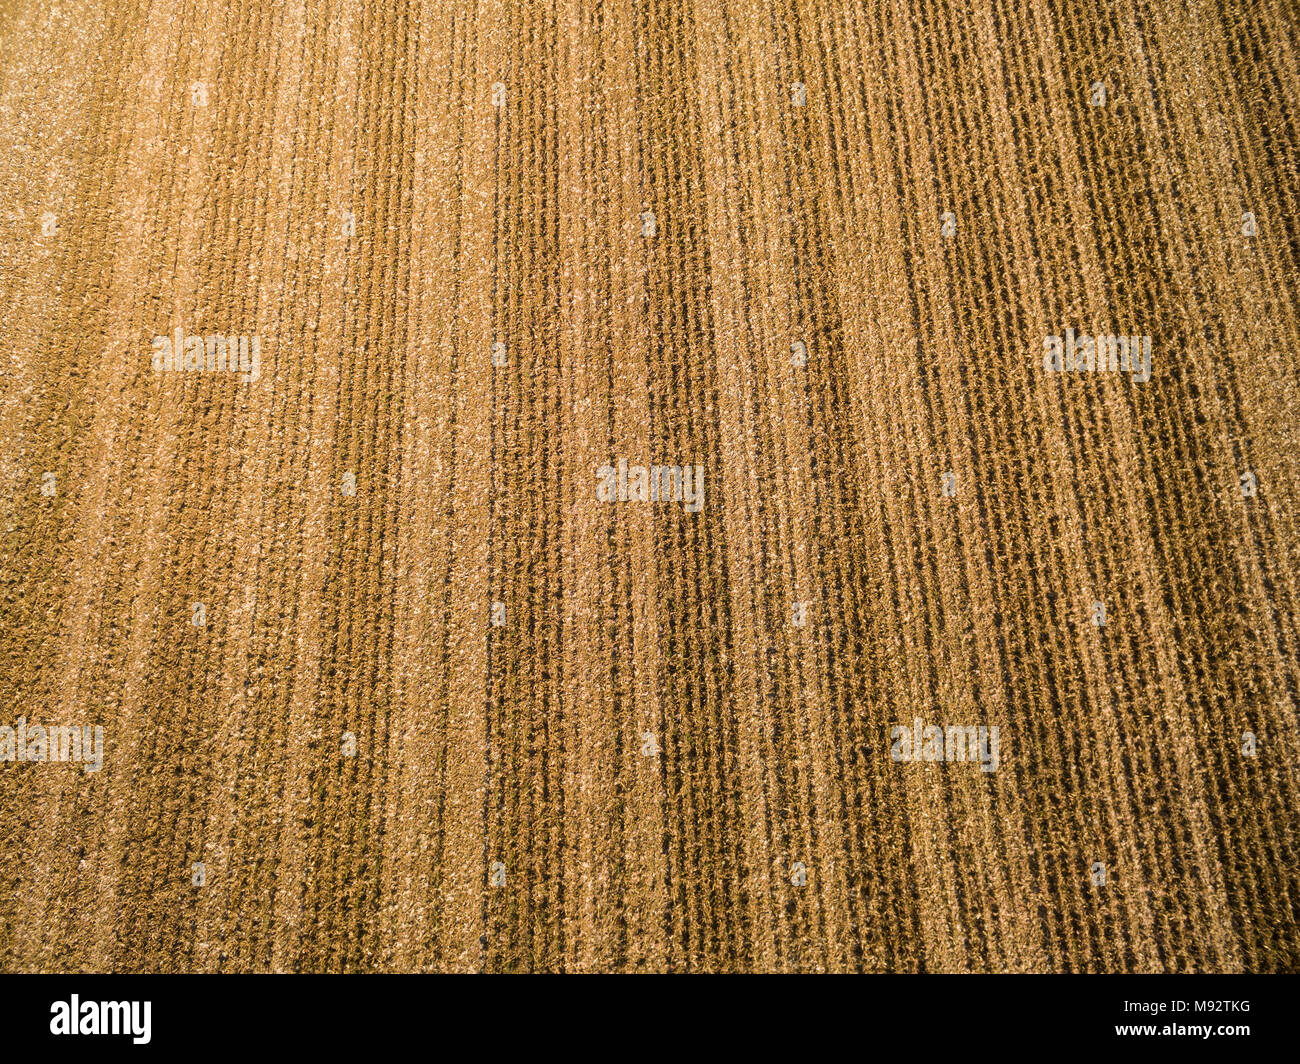 63801-08706 Field of corn after being harvested- aerial - Marion Co. IL Stock Photo